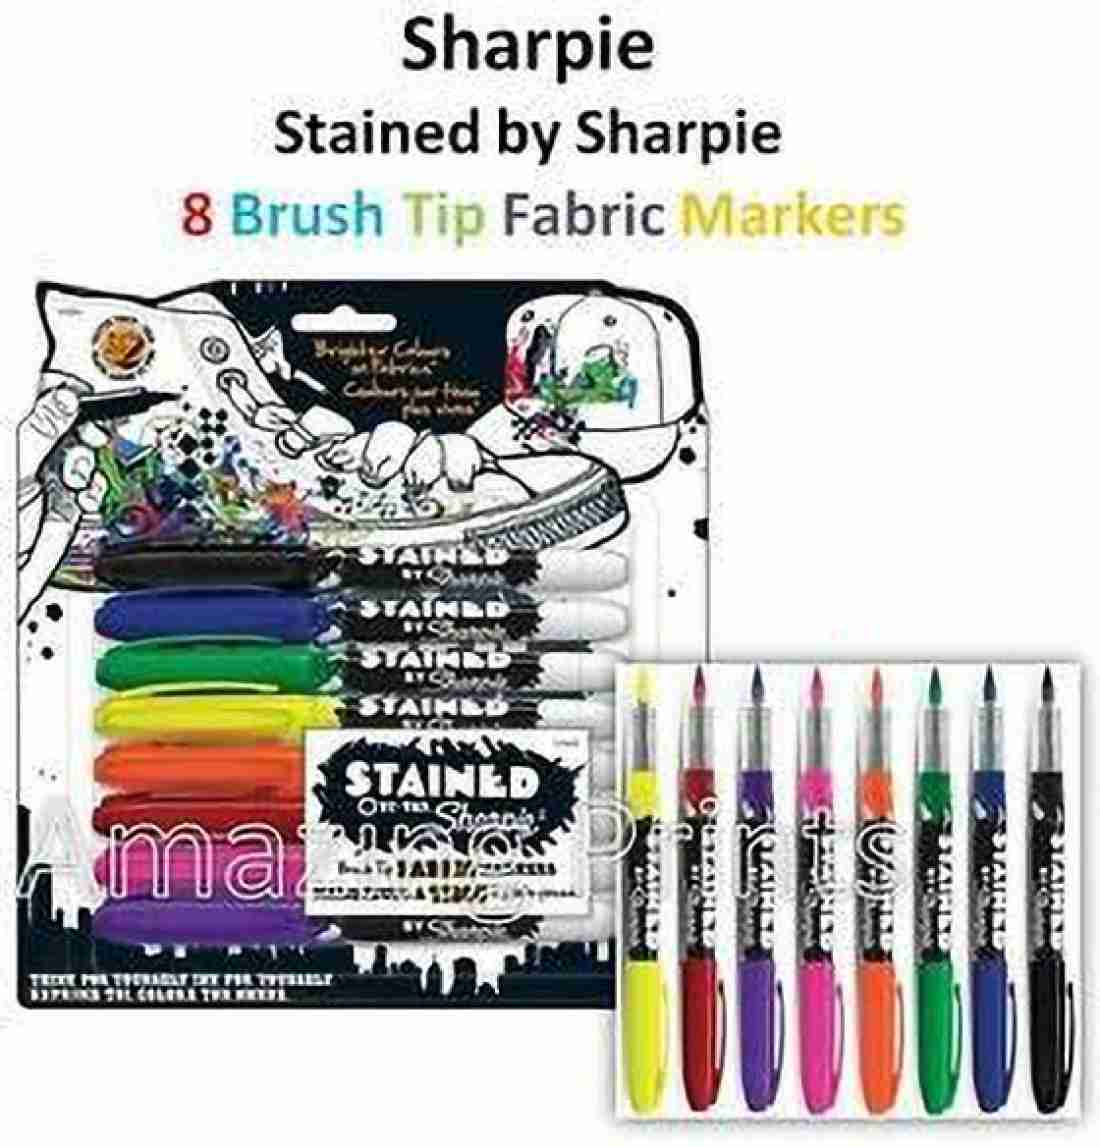 Sharpie Stained by Sharpie Brush Tip Fabric Markers